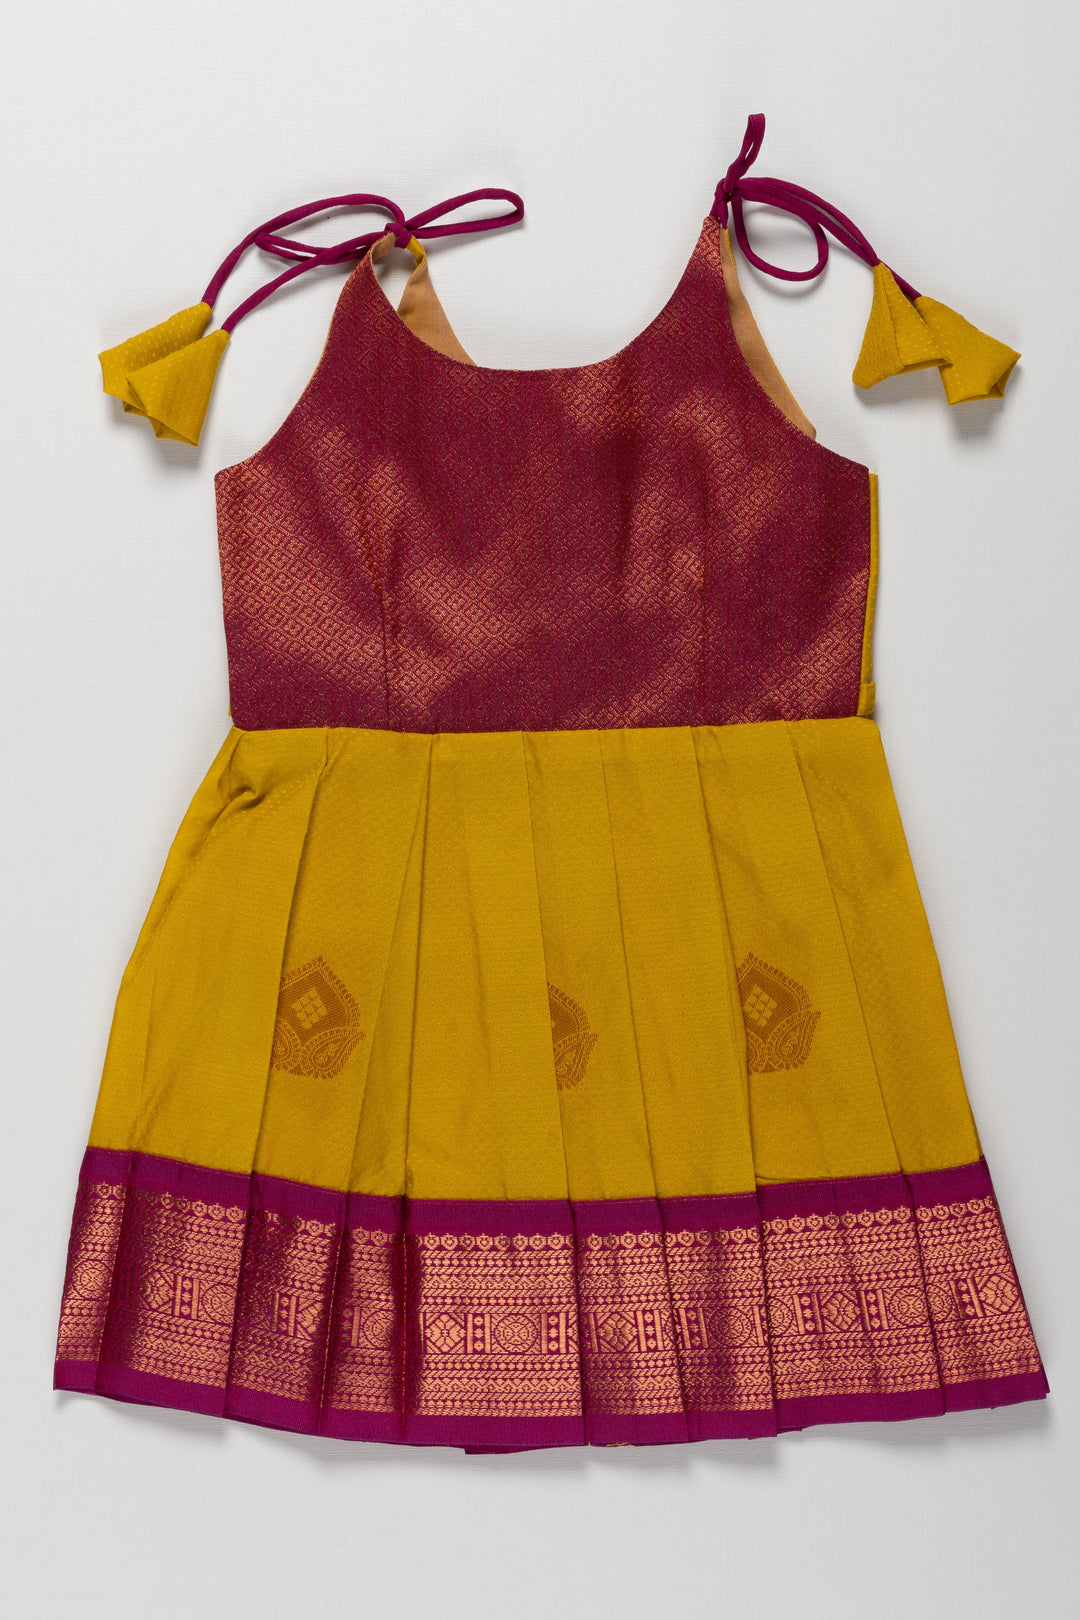 The Nesavu Tie-up Frock Radiant Silk Knot-Tie Frock for Namakarana and Karnavedha: Diverse and Bold Color Combinations Nesavu 14 (6M) / Yellow / Style 3 T379C-14 Stylish Maroon and Gold Silk Dresses for Kids | Unique Party Wear with Adjustable Ties | The Nesavu